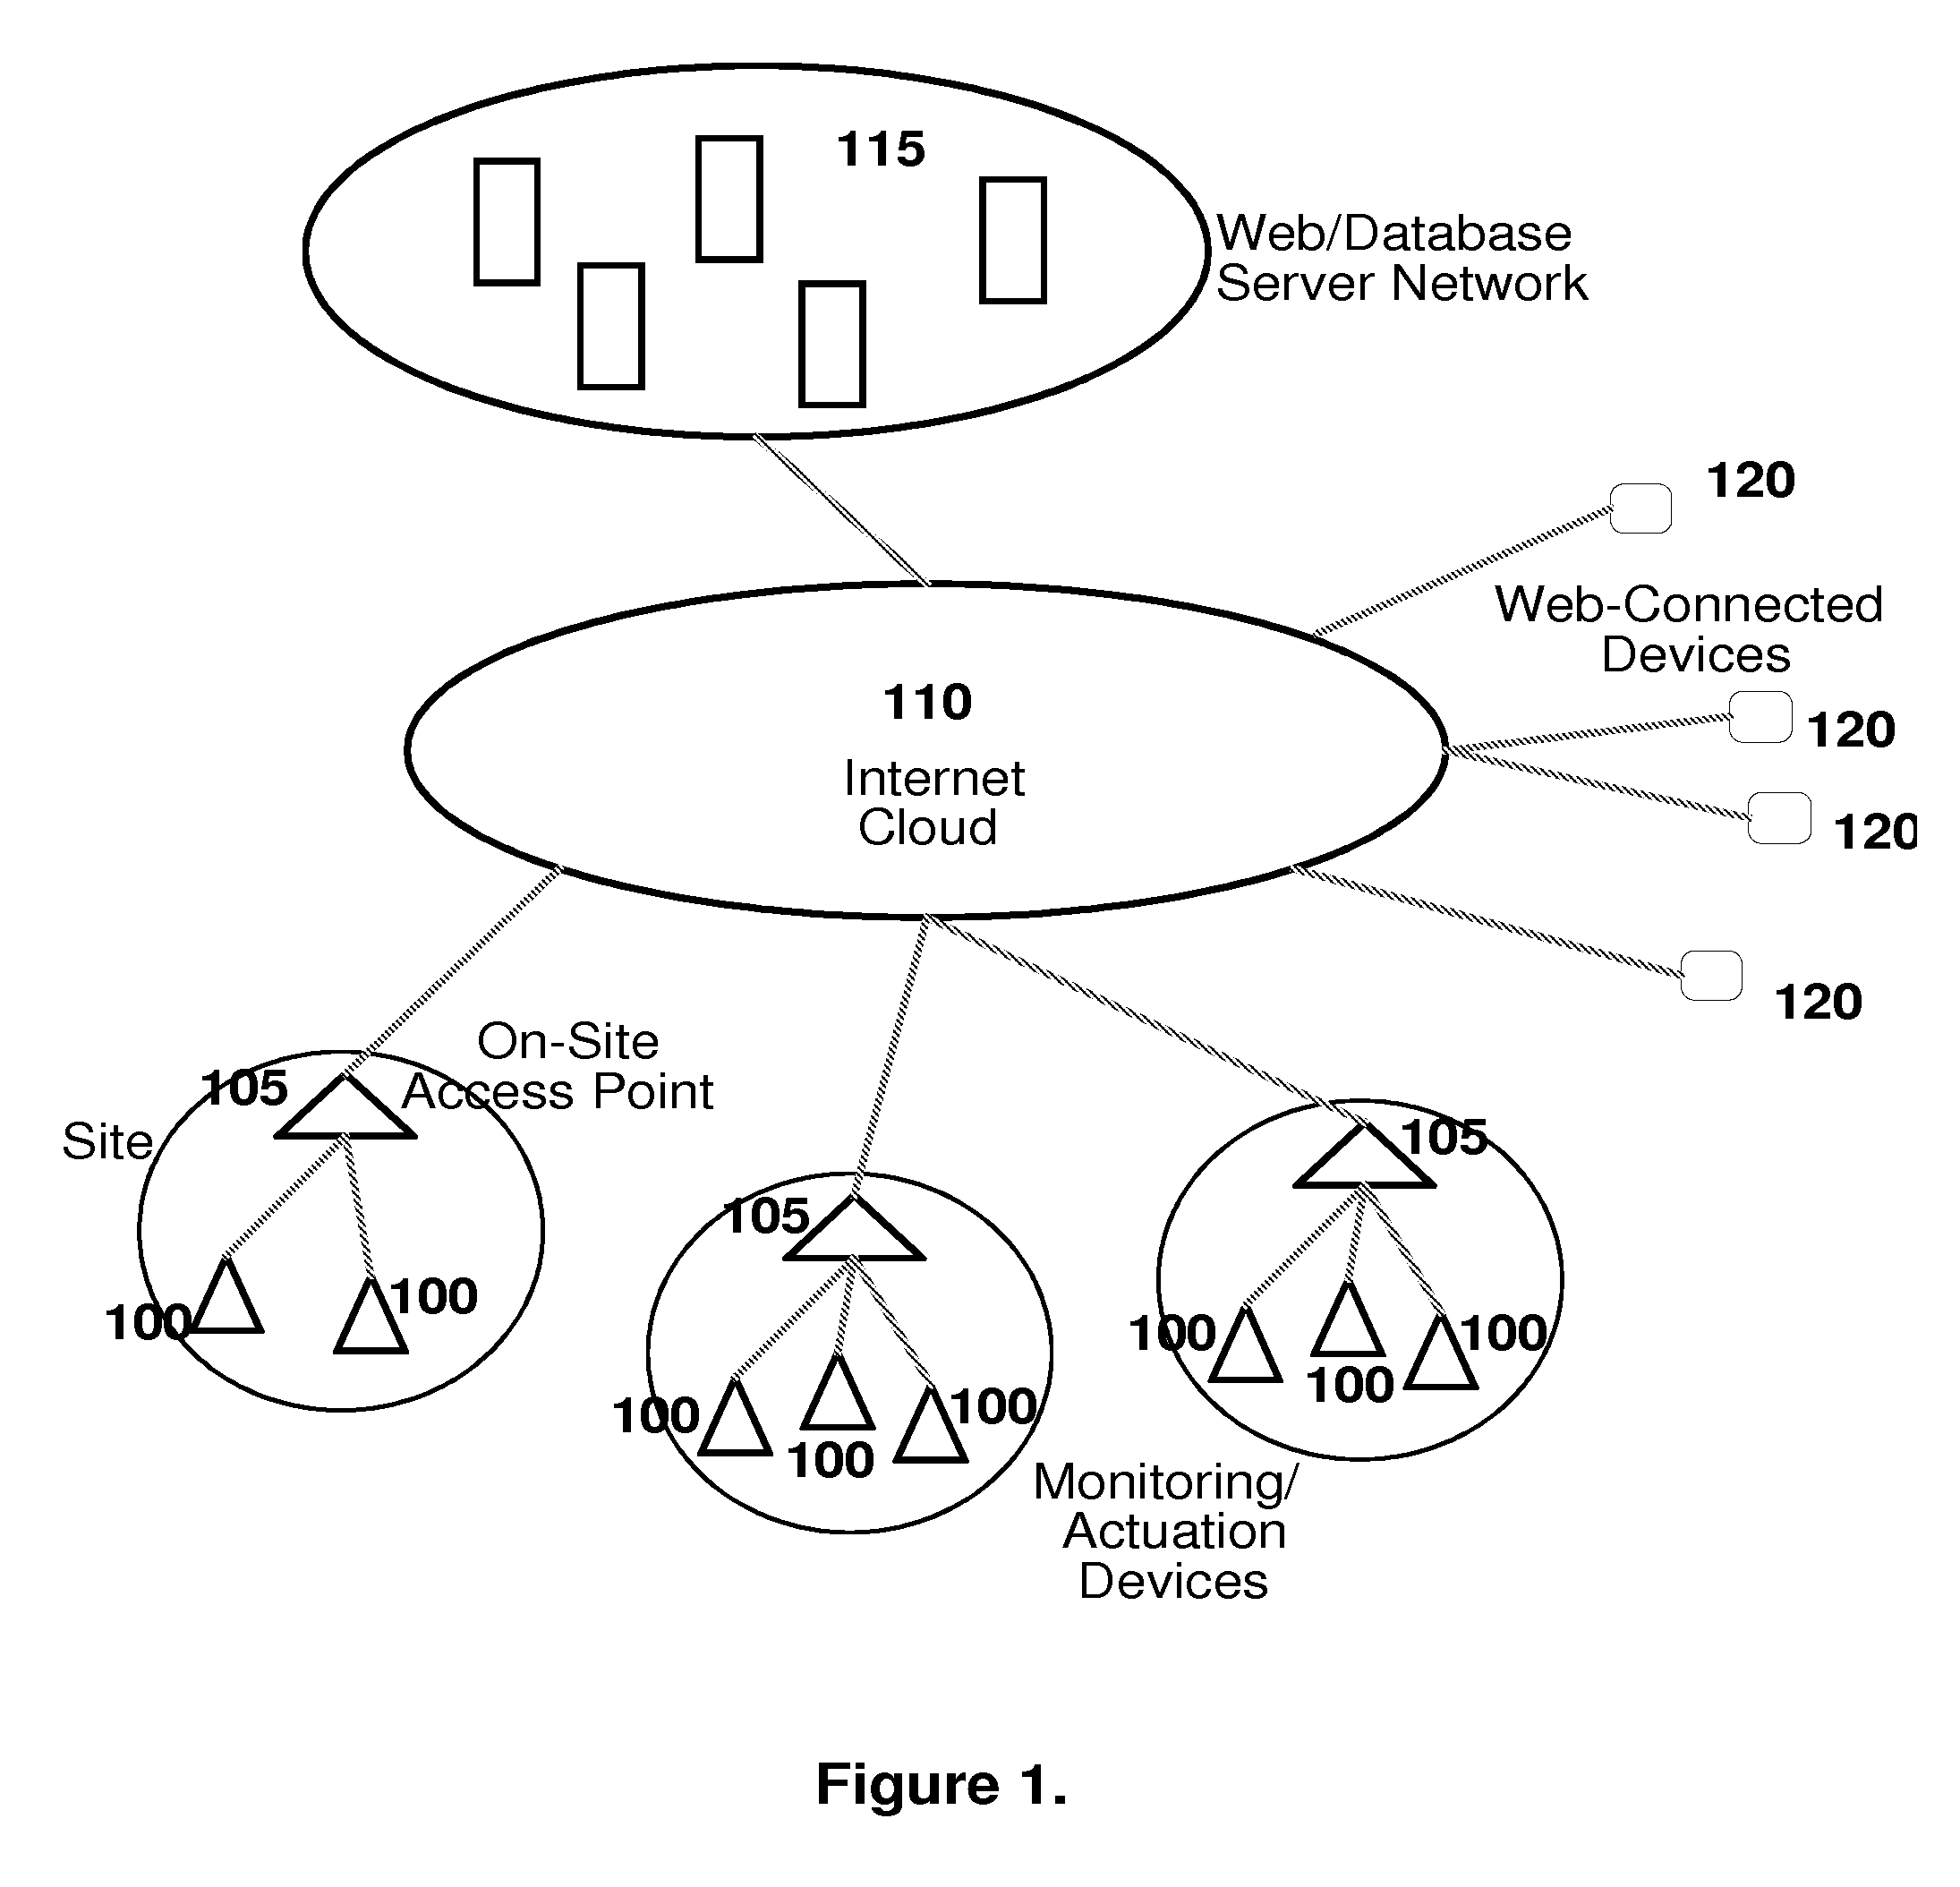 System and Methods for Distributed Web-Enabled Monitoring, Analysis, Human Understanding, and Multi-Modal Control of Utility Consumption